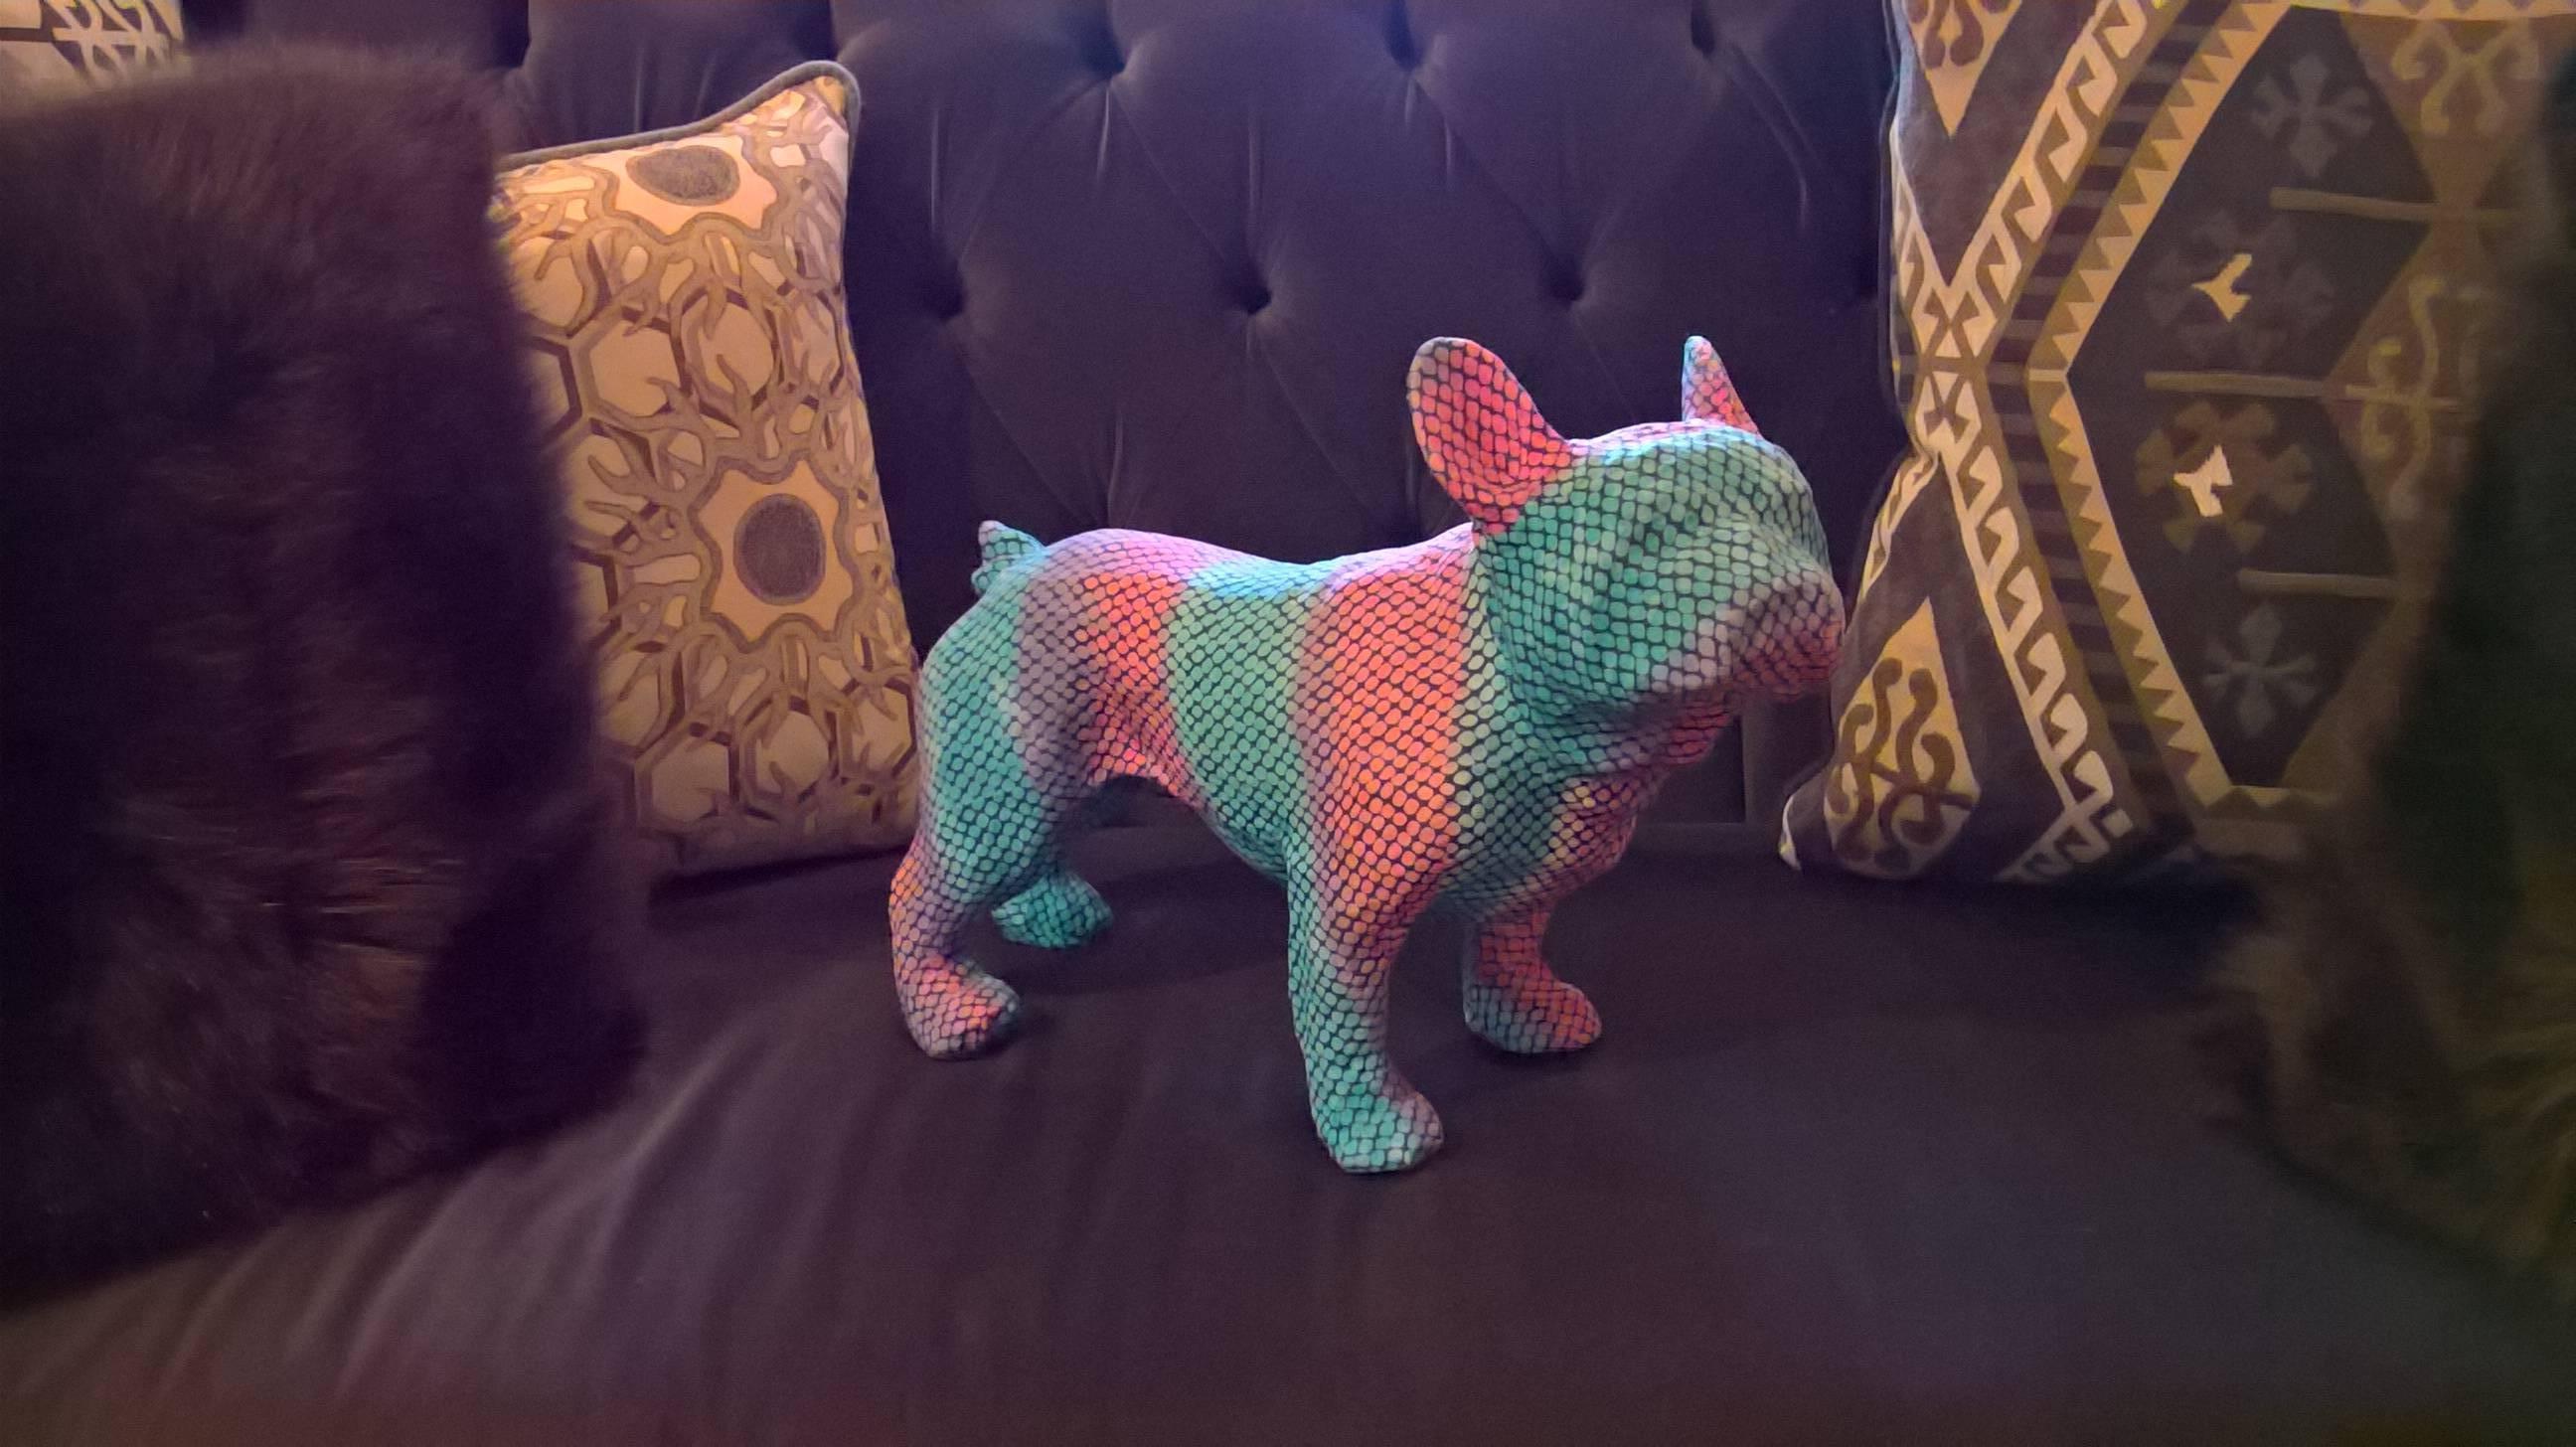 Naturalistic formed French bulldog sculpture. Made of acrylic resin completely covered with fabric in bright pink and blue colors.